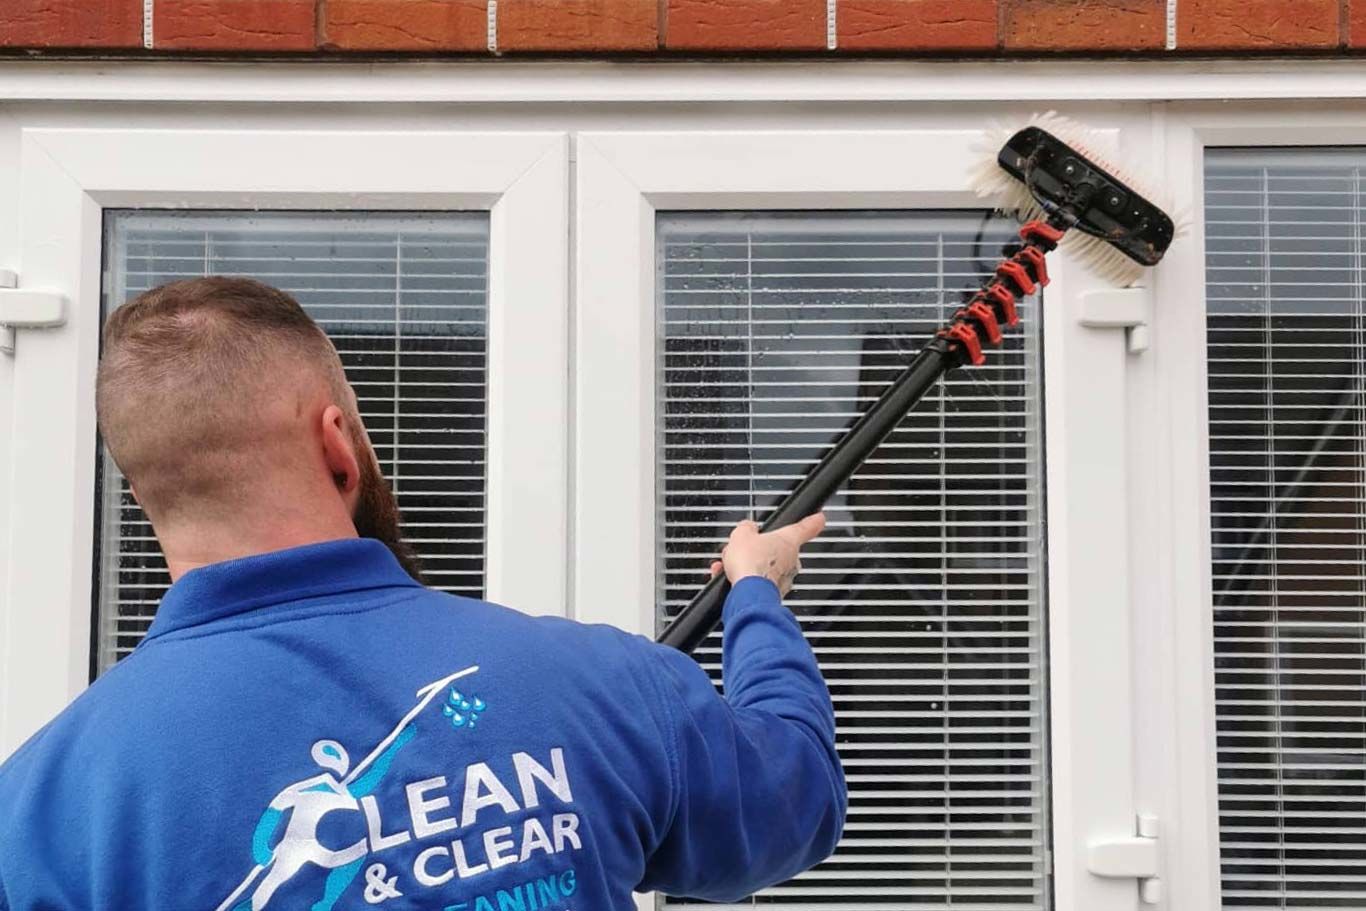 Man wearing a blue jumper with the clean and clear window cleaning logo on the back cleaning a window.